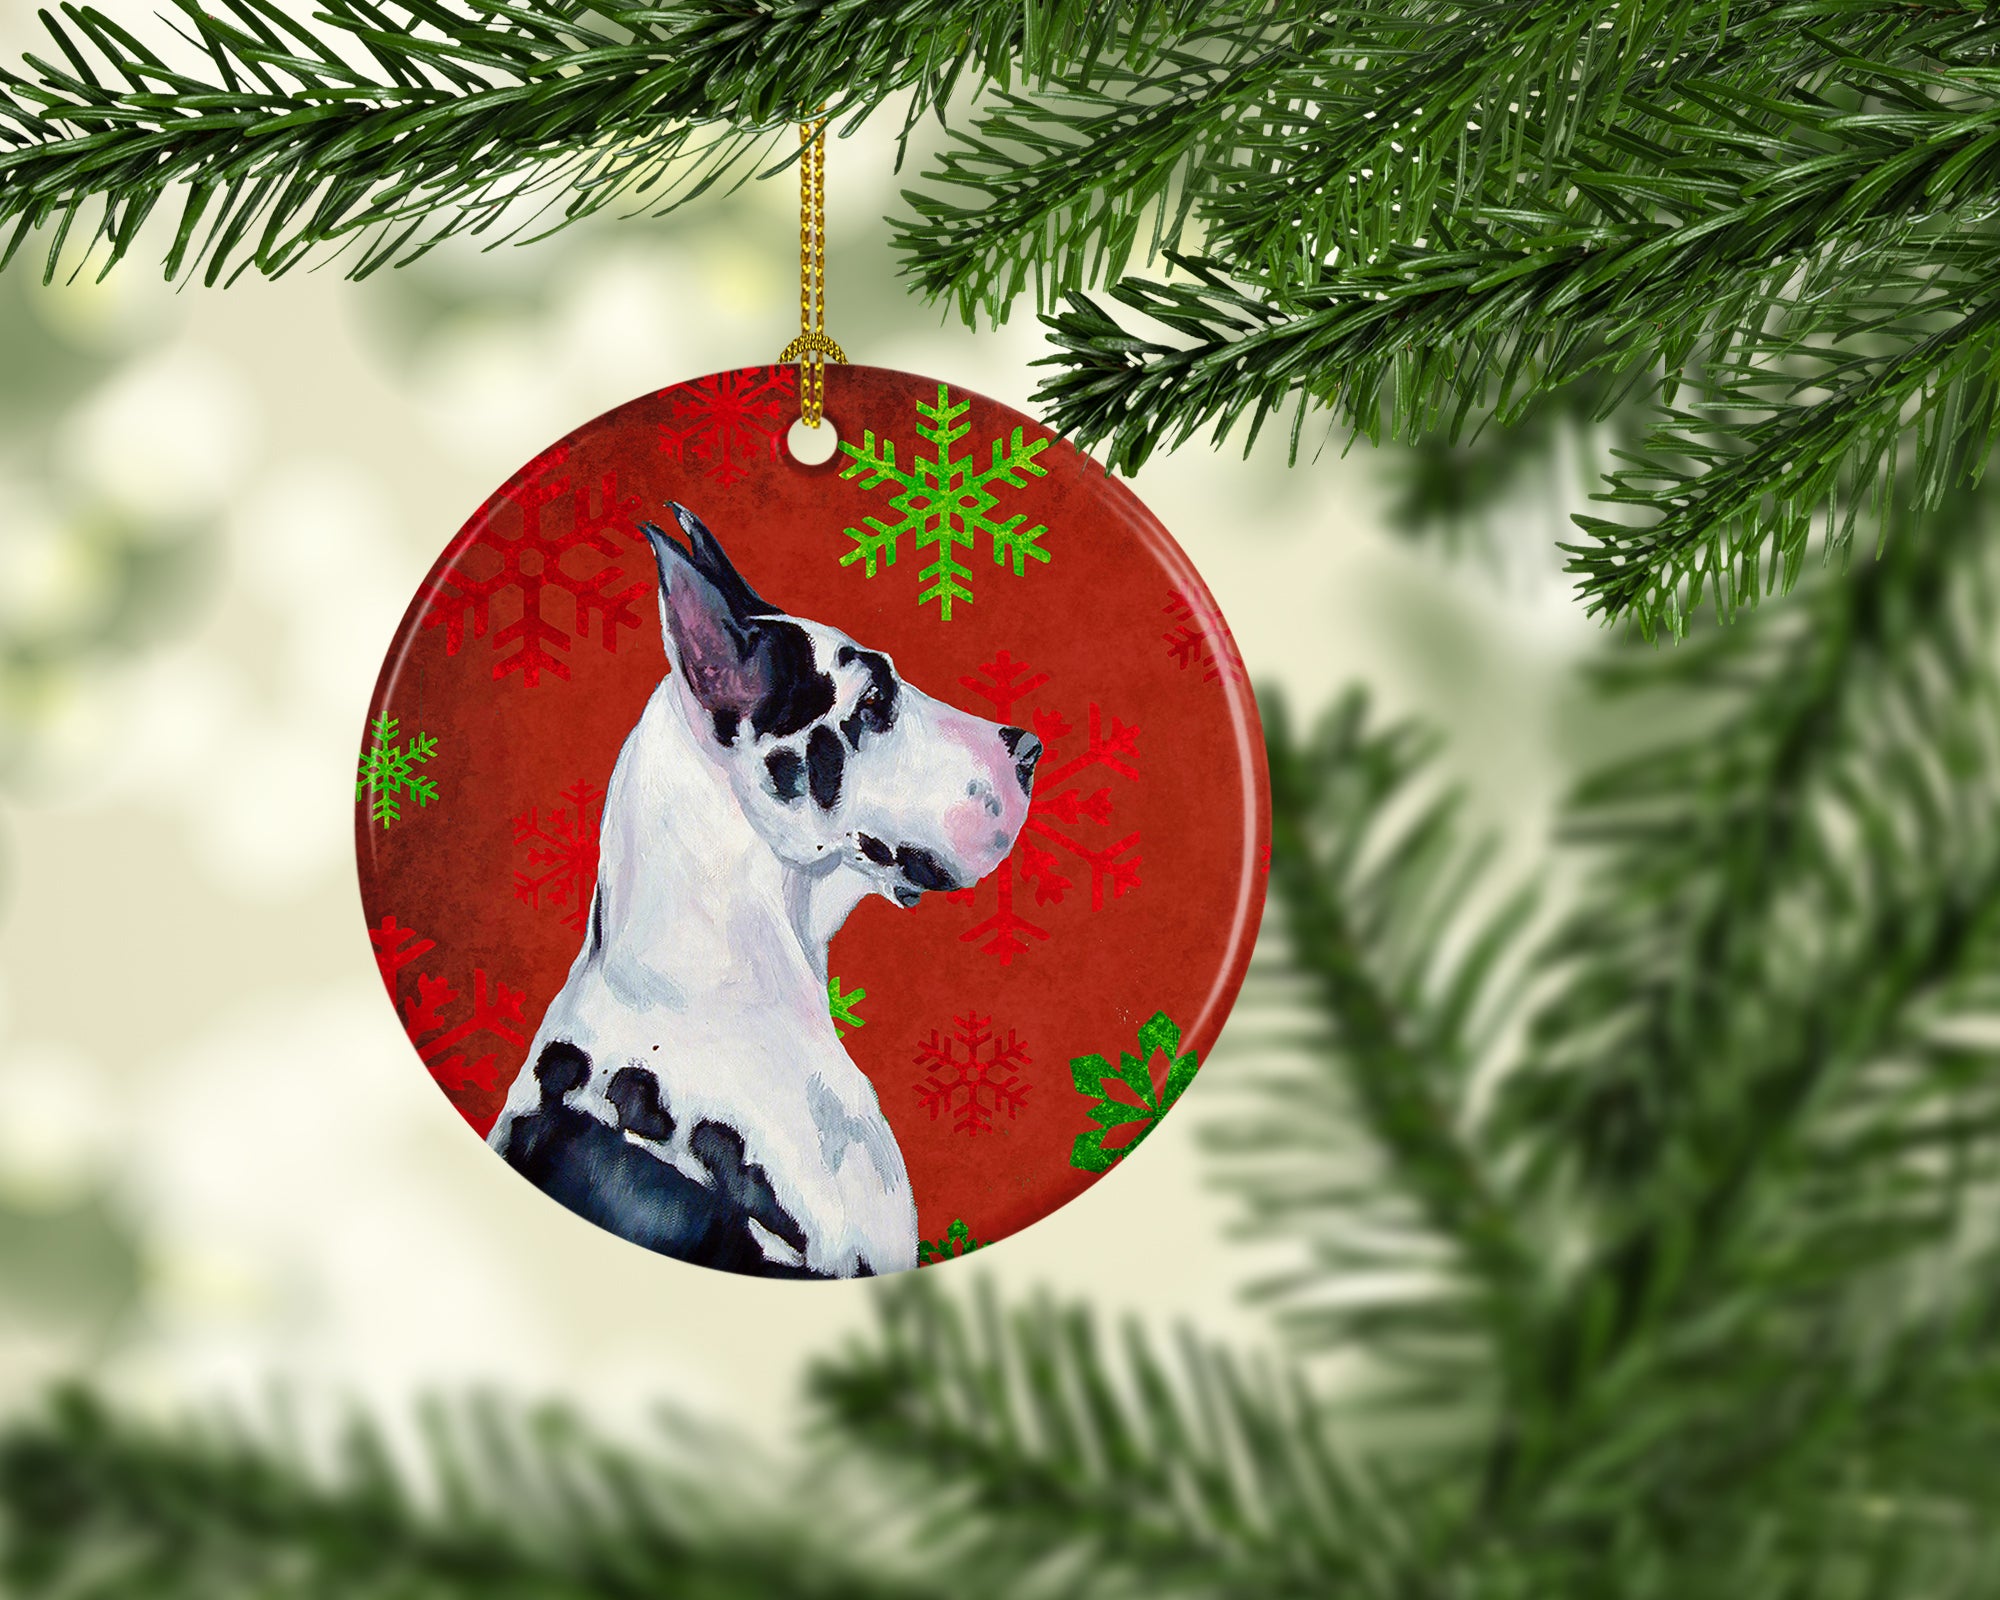 Great Dane Red Snowflake Holiday Christmas Ceramic Ornament LH9326 - the-store.com